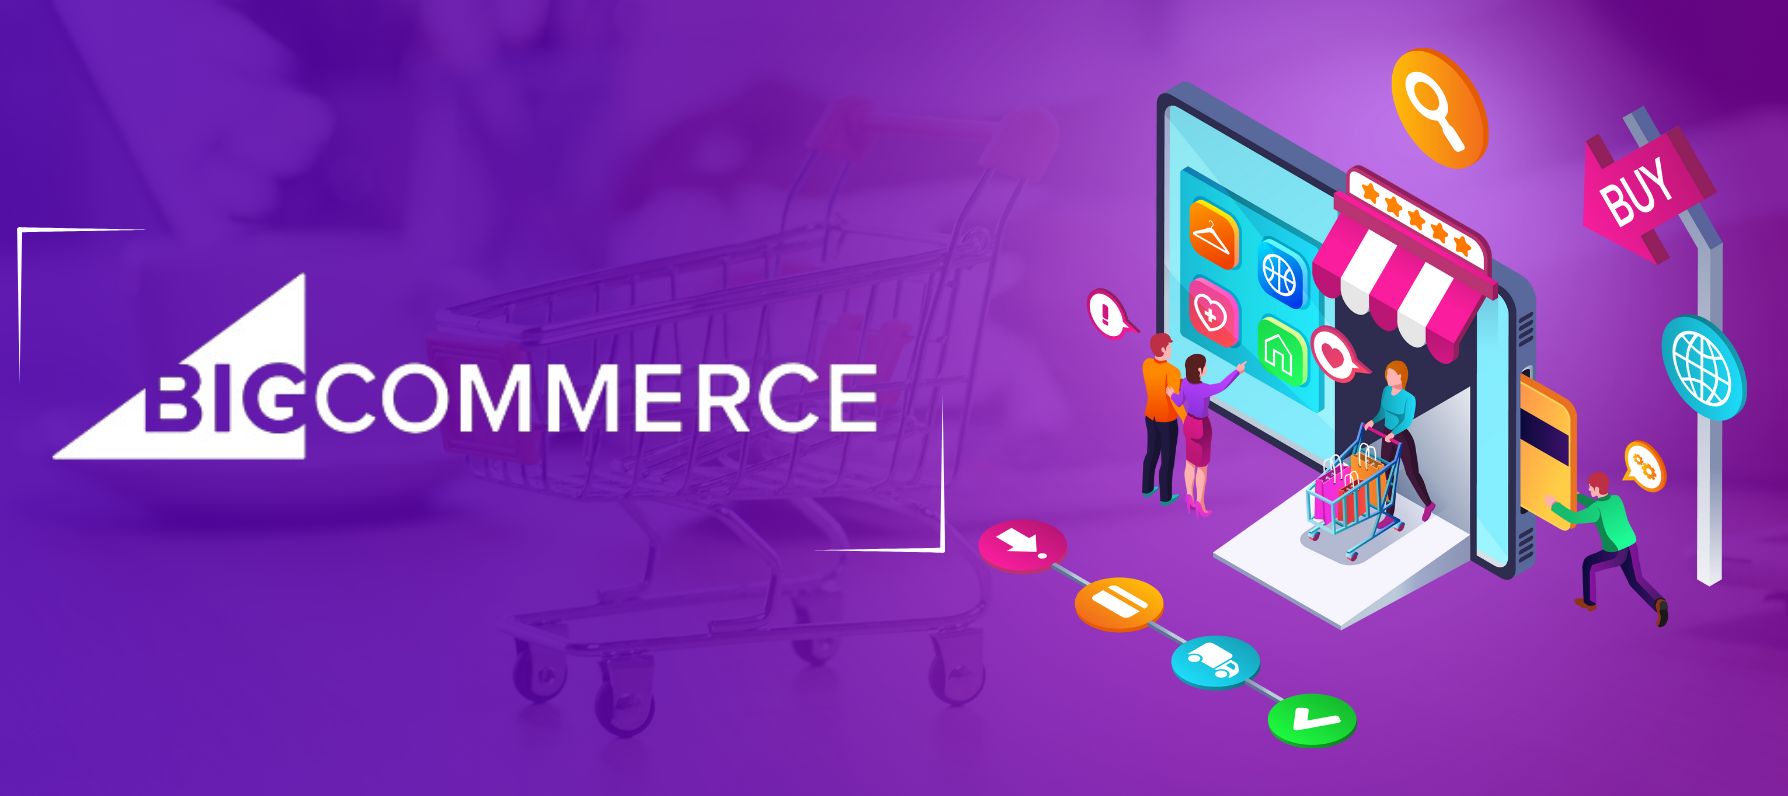 BigCommerce: Your Big Friend in Building a Beautiful Online Store